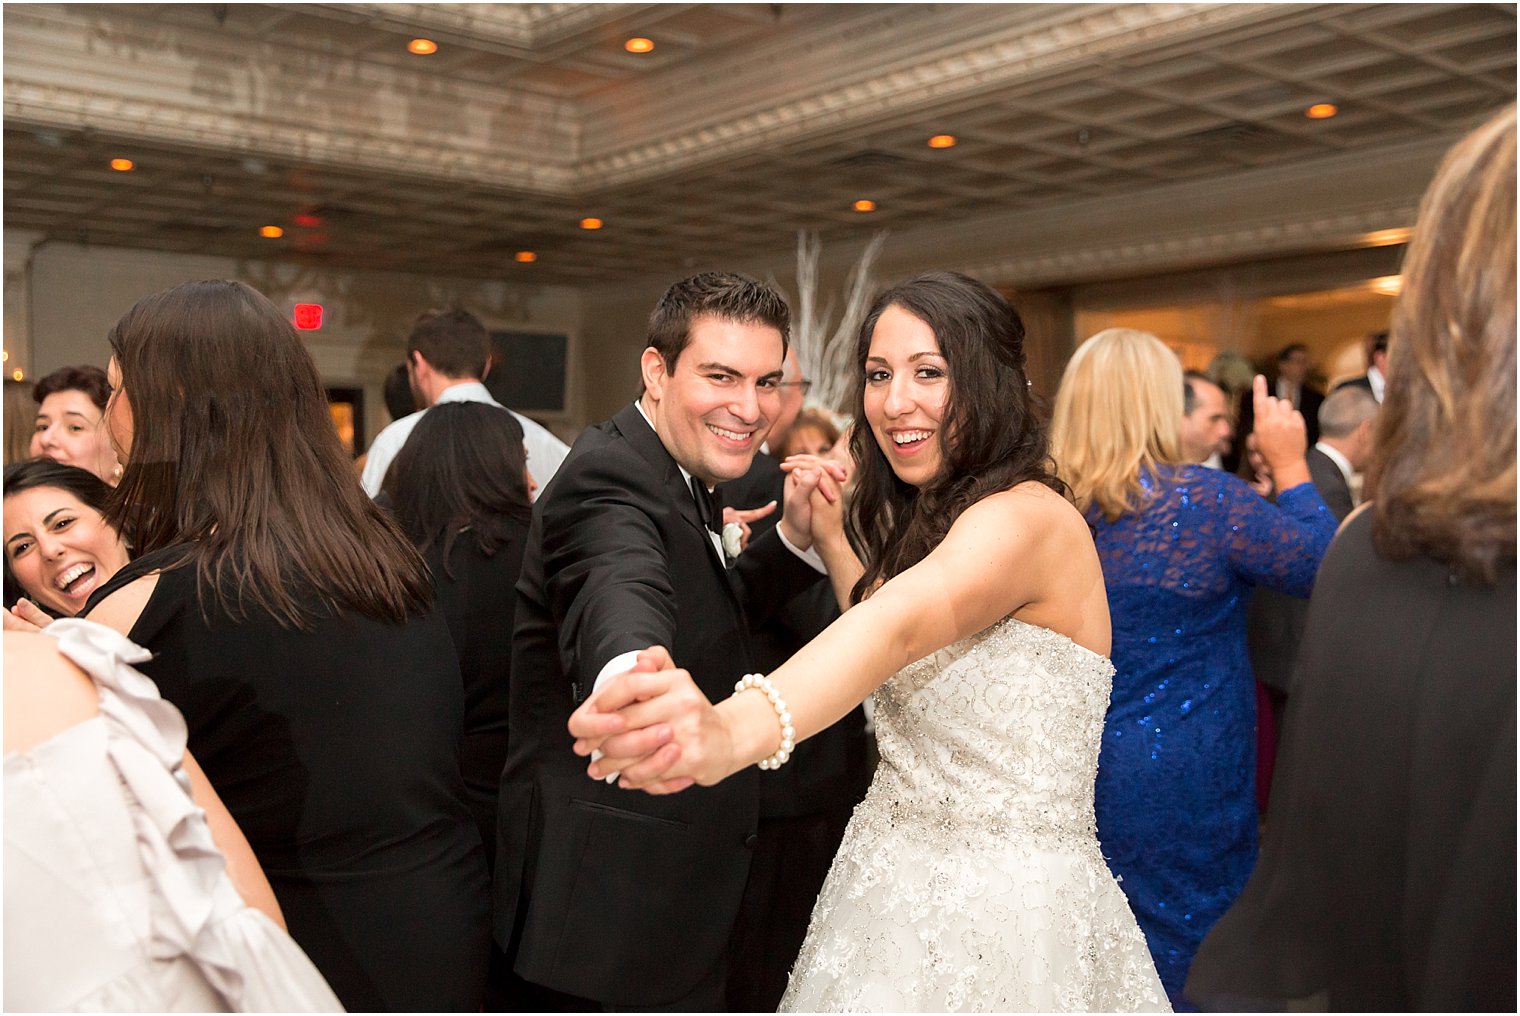 Reception dancing to Silver Arrow Band | Photo by Idalia Photography